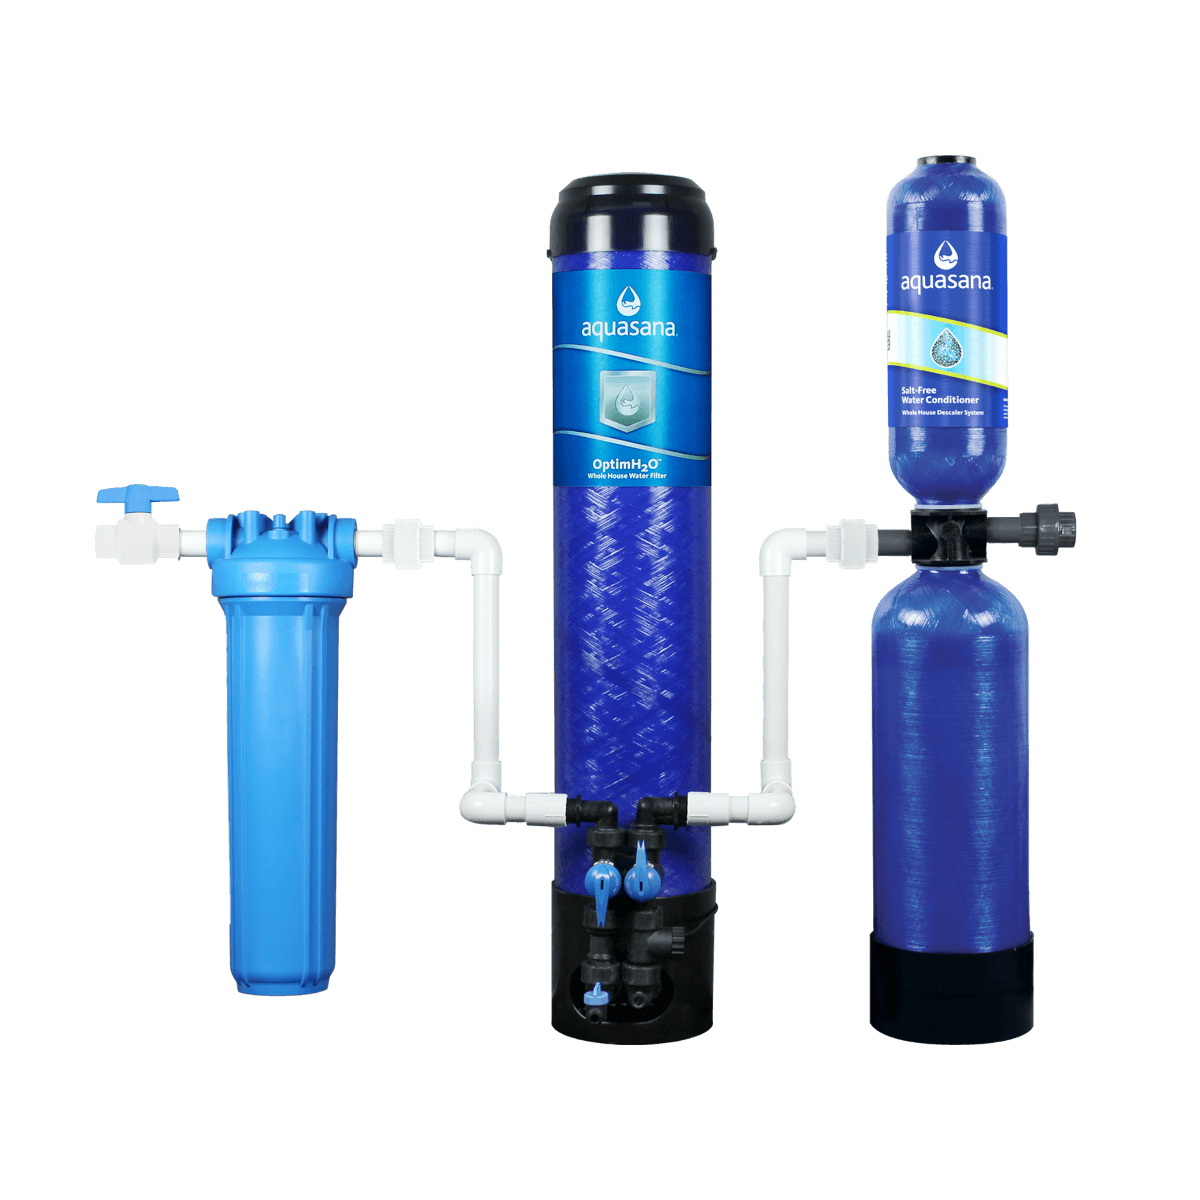 OptimH2O® Whole House Water Filter System For Home With Salt-Free Water Conditioner Reduces Lead, Cysts, & PFOA/PFOS Aquasana